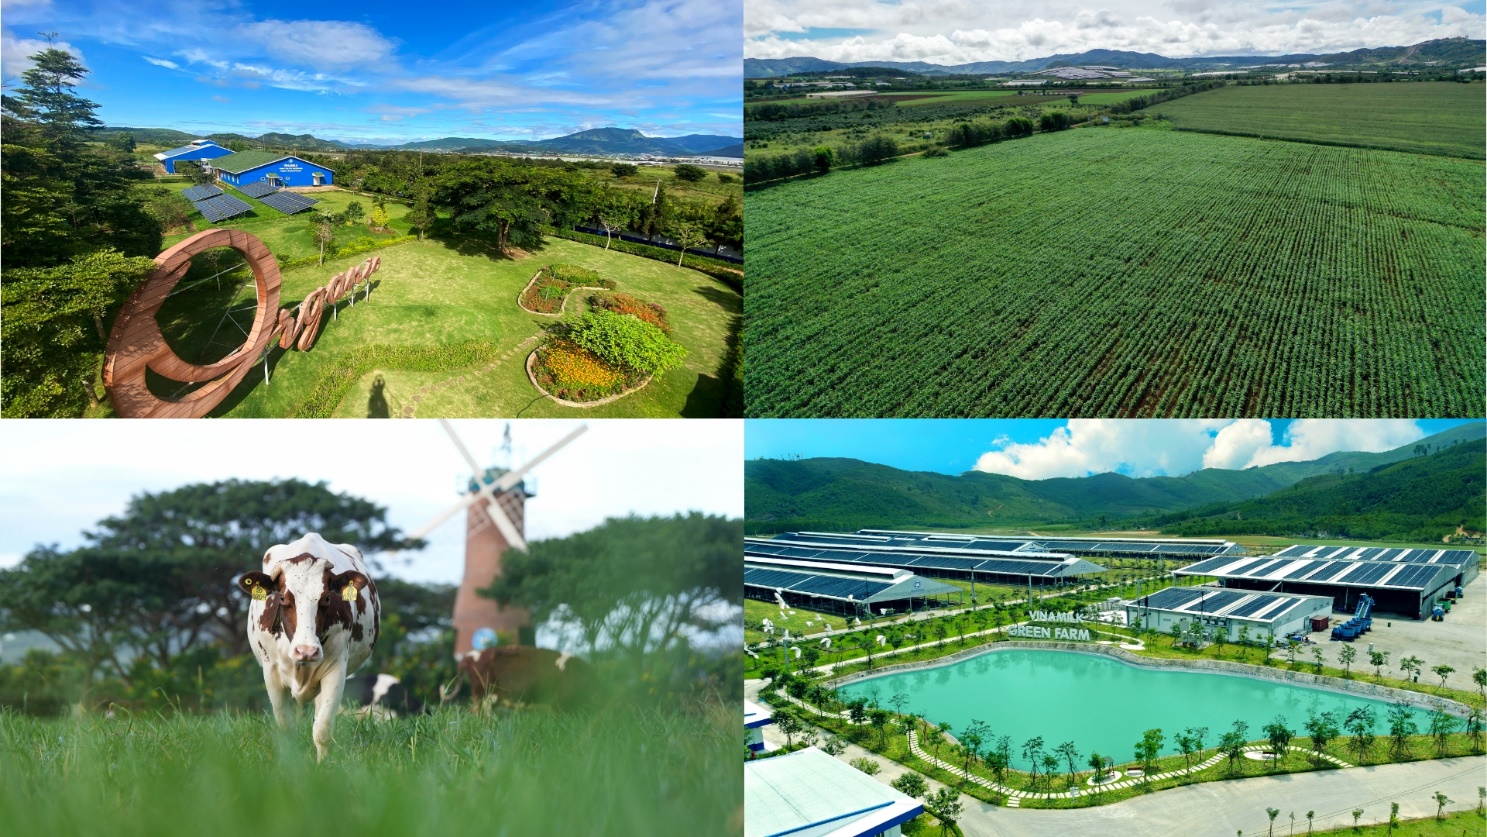 A collage of different images of fields and buildings

Description automatically generated